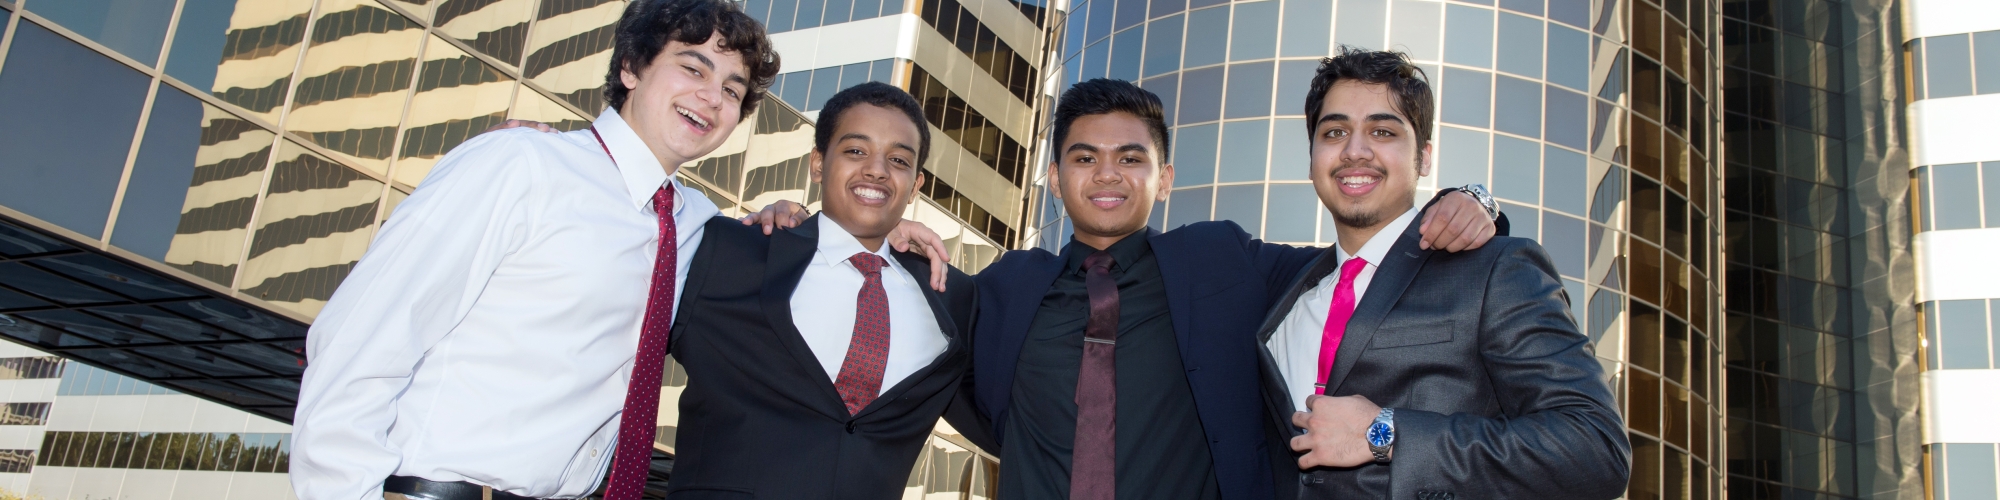 a group of four teenage boys dressed in suits standing in front of buildings